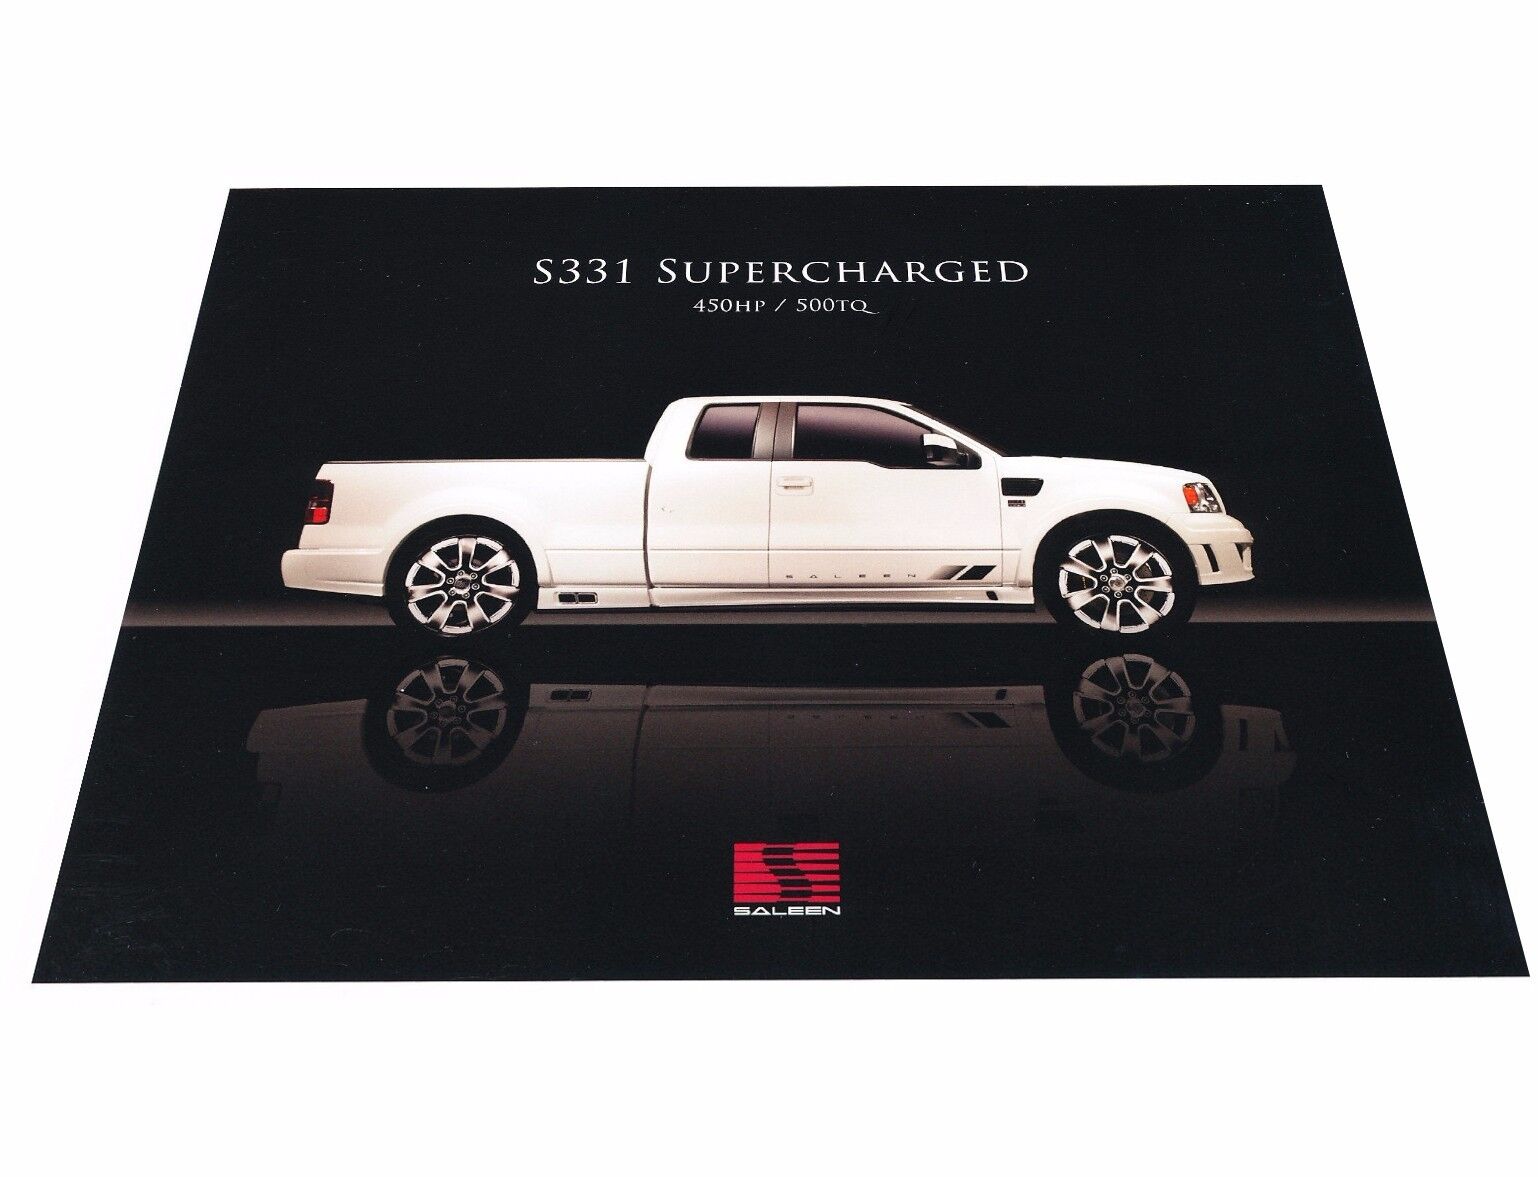 2007 Saleen Ford F-150 Truck S331 Supercharged Sales Brochure